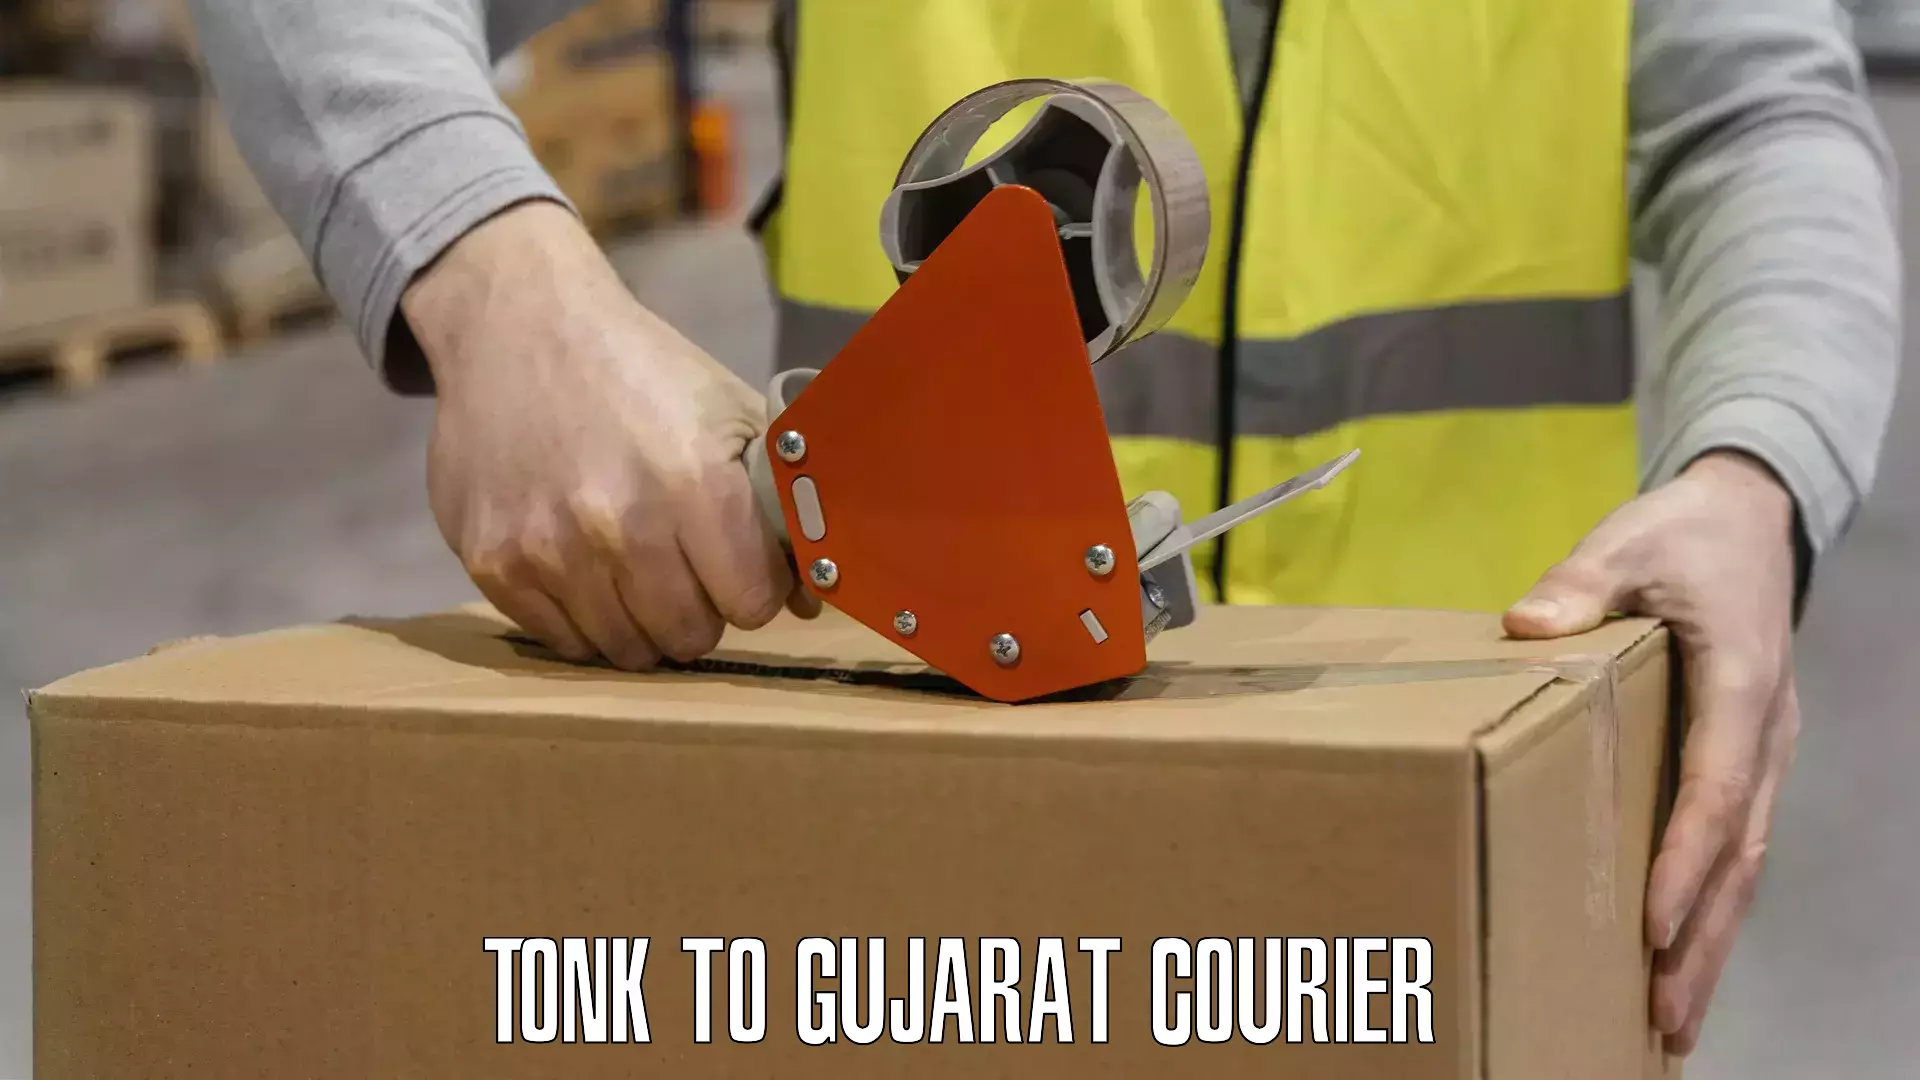 Courier service innovation in Tonk to Gujarat